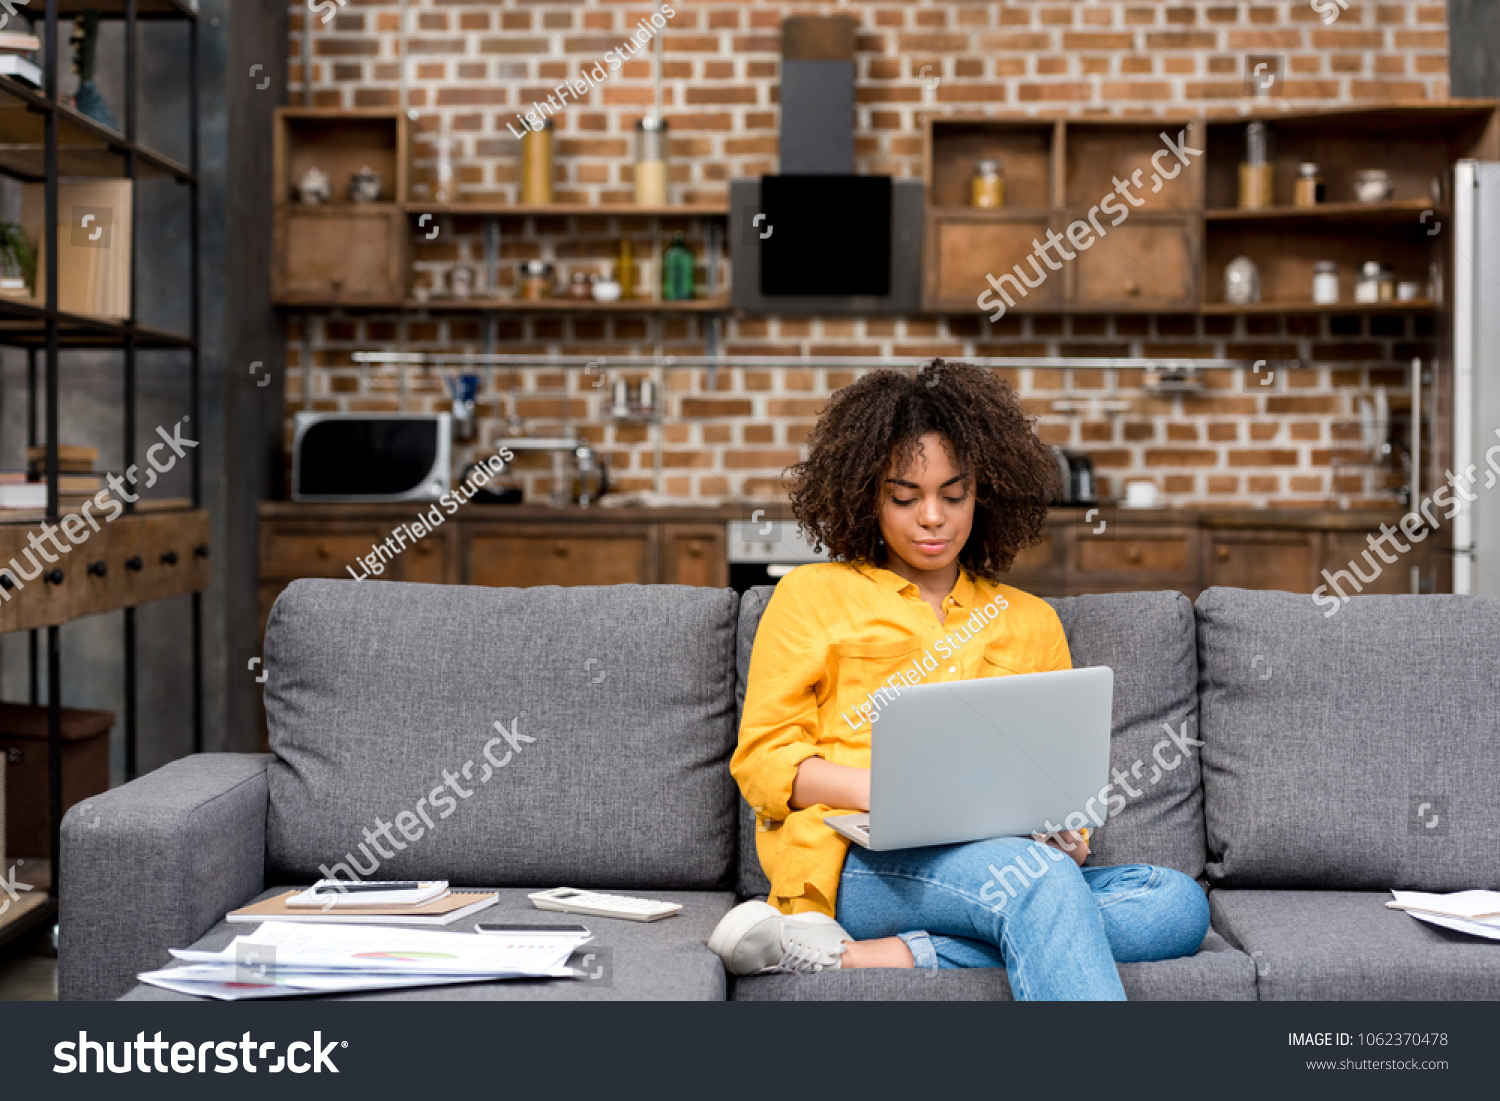 attractive young woman working working with laptop on couch #1062370478